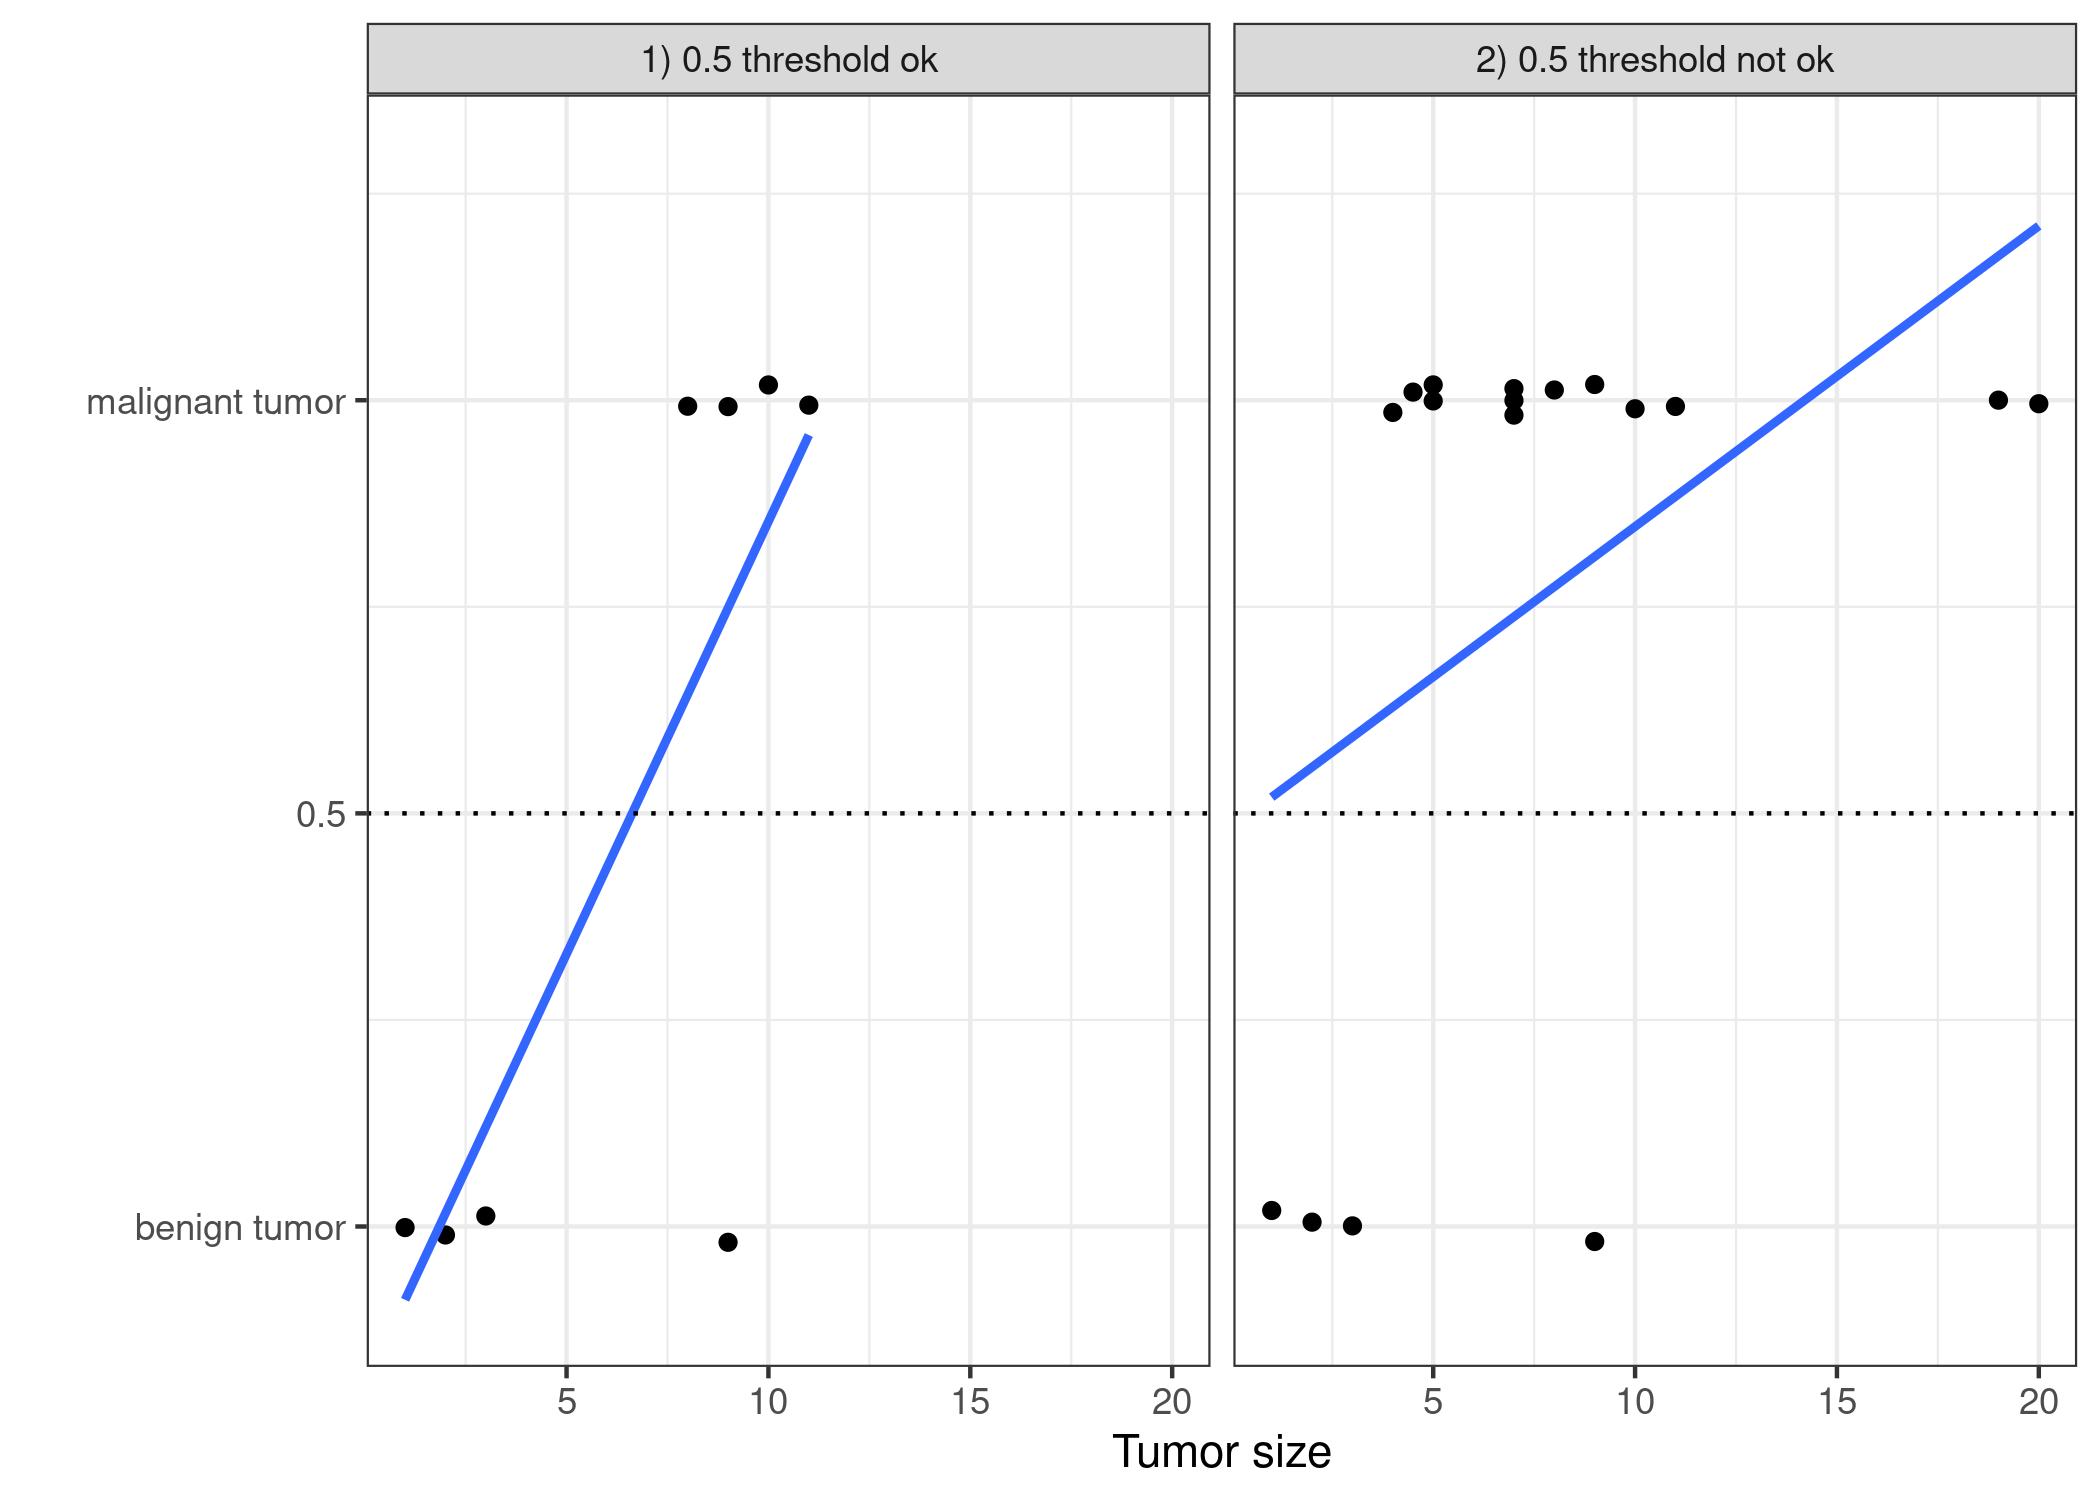 A linear model classifies tumors as malignant (1) or benign (0) given their size. The lines show the prediction of the linear model. For the data on the left, we can use 0.5 as classification threshold. After introducing a few more malignant tumor cases, the regression line shifts and a threshold of 0.5 no longer separates the classes. Points are slightly jittered to reduce over-plotting. 